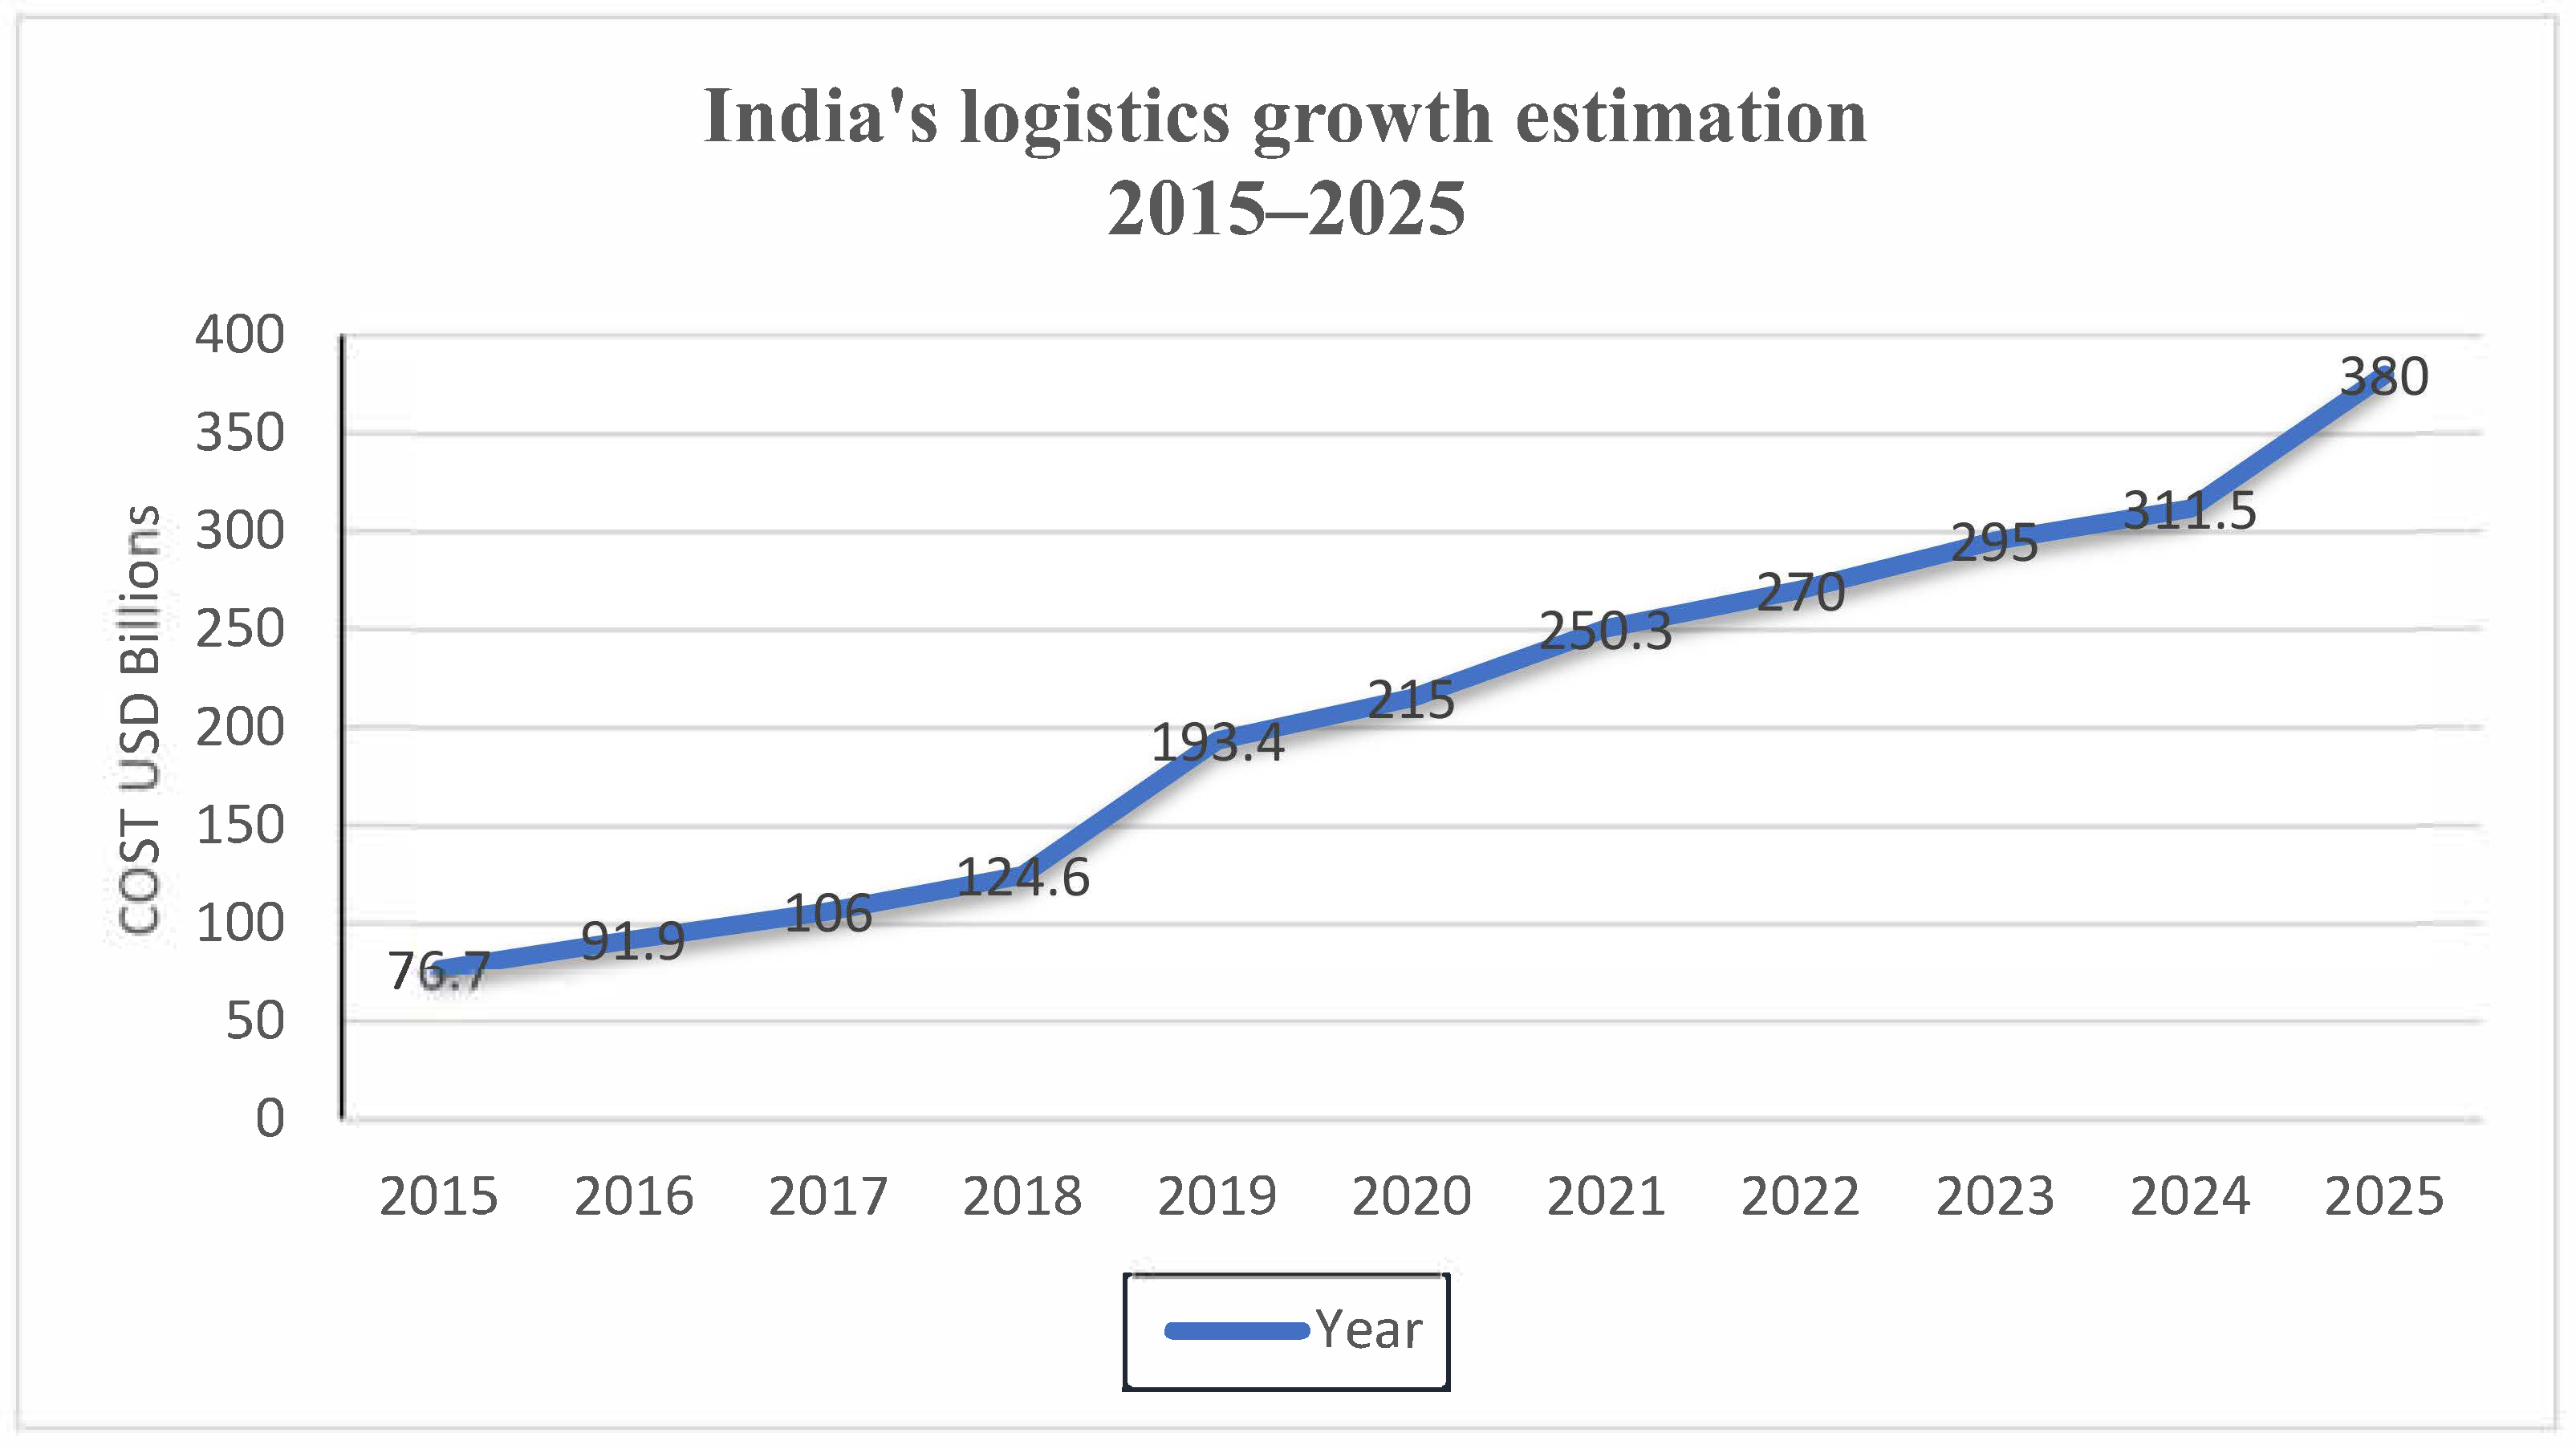 Say You Want A Revolution? A 2019 Last Mile Logistics Growth